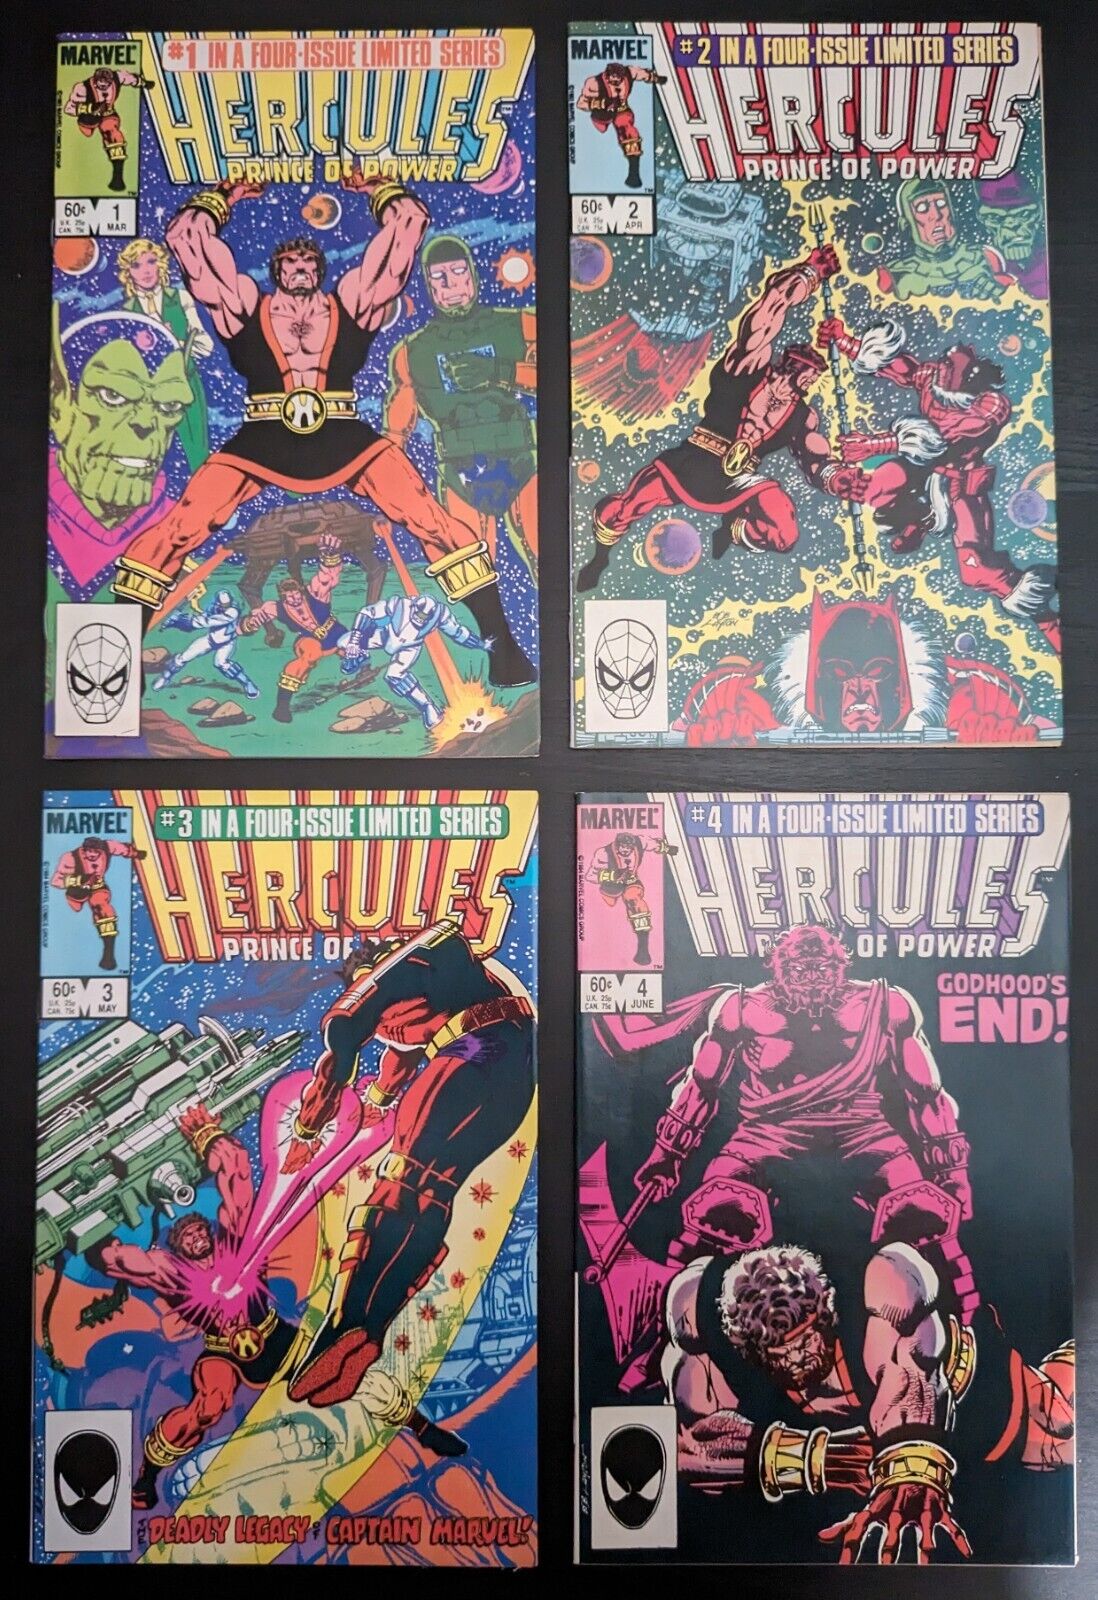 Hercules: The Prince of Power #1-4 Complete Series Vol 2 (1984); Marvel Comics